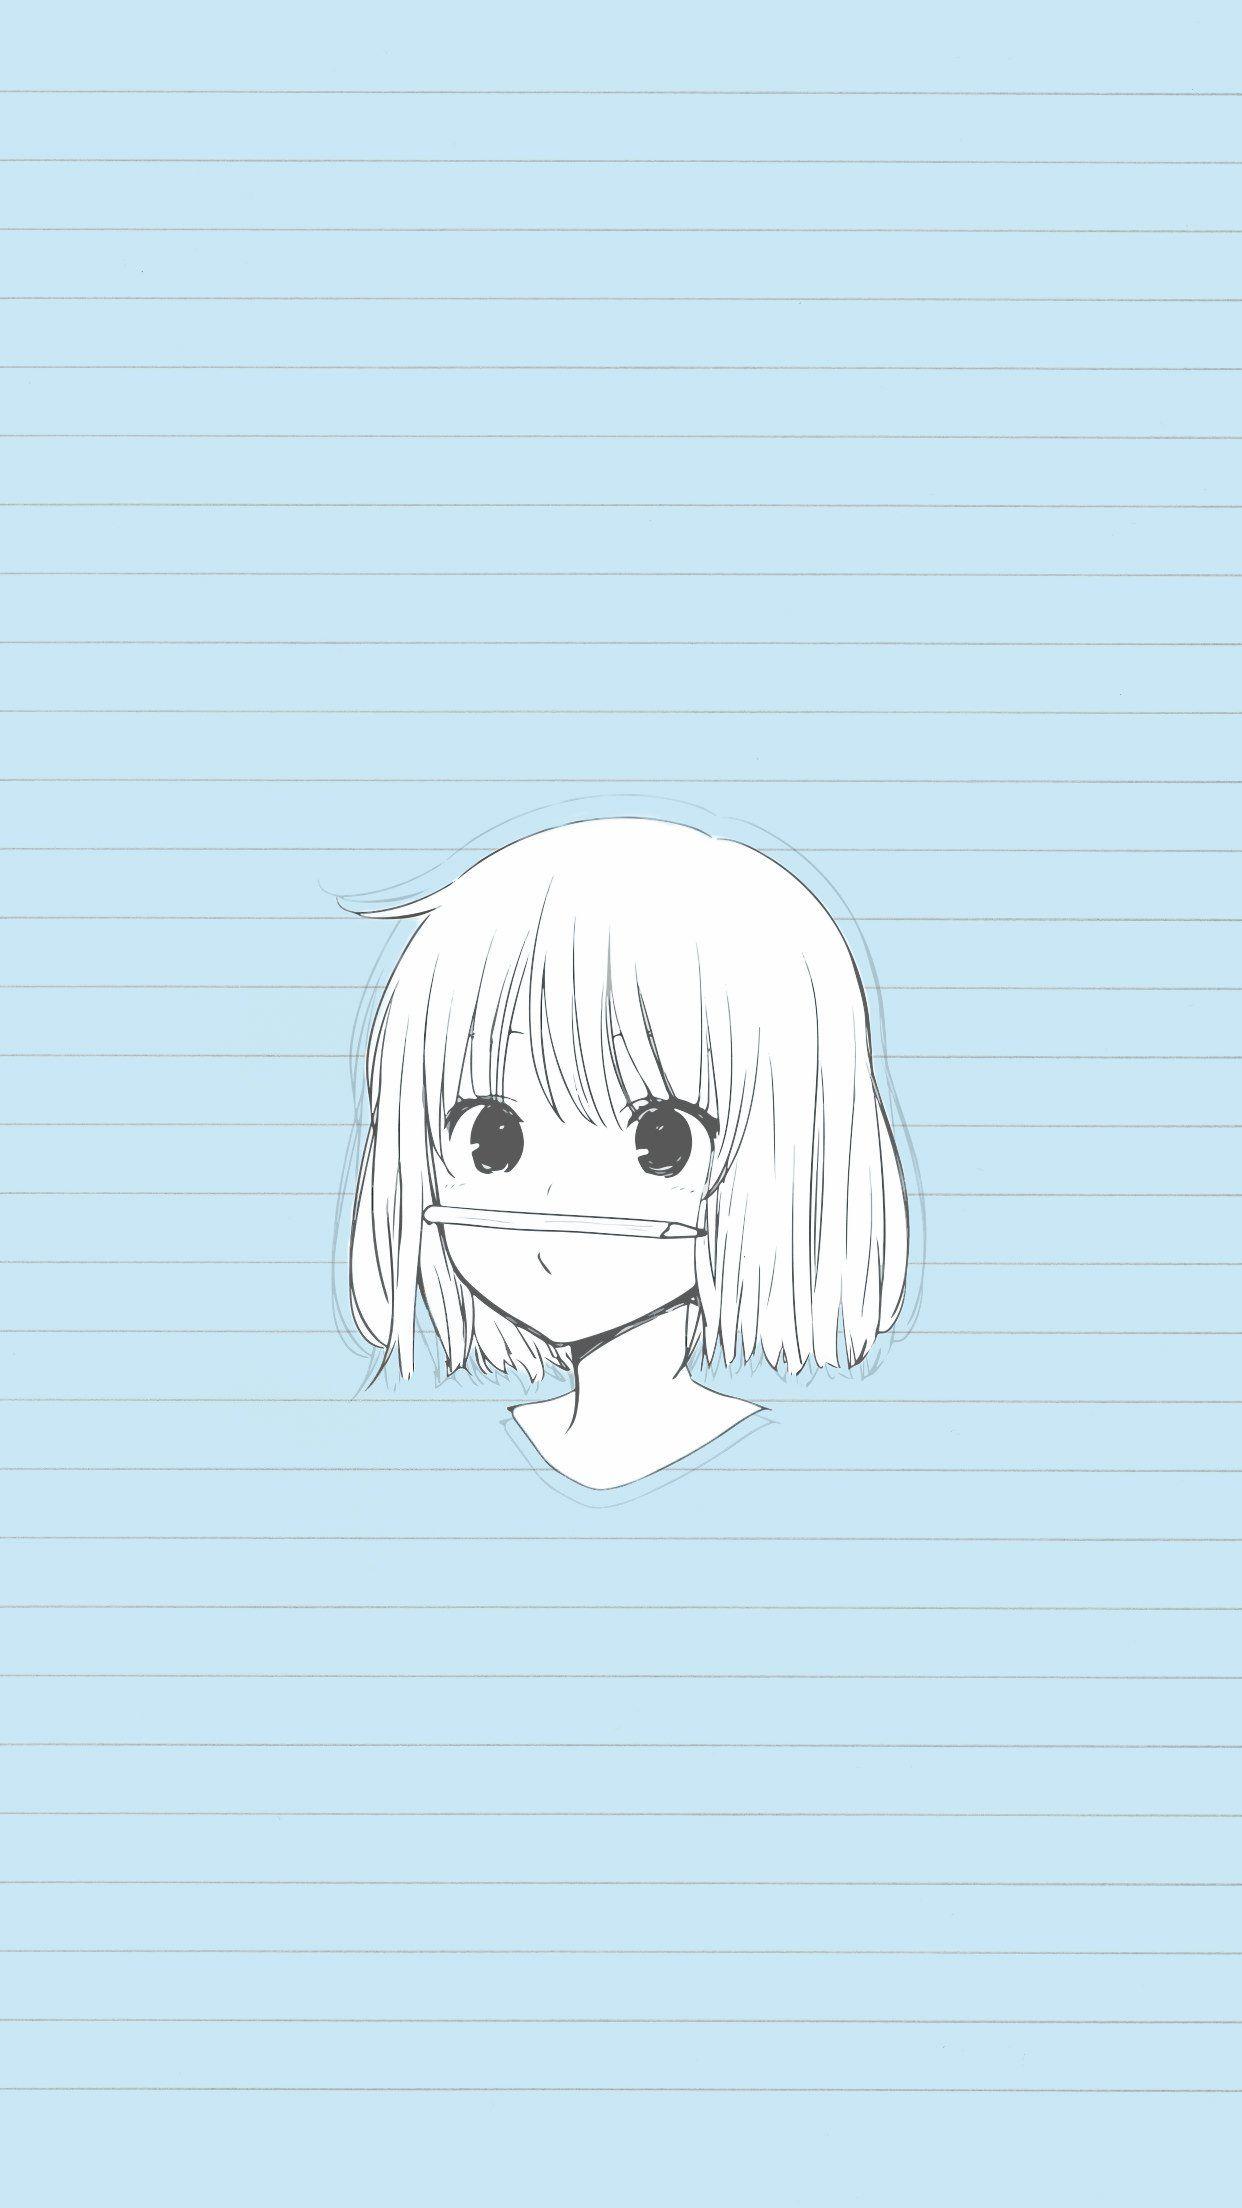 An Anime Drawing Showing A Girl Who Is Crying Background Cute Outline  Picture Background Image And Wallpaper for Free Download